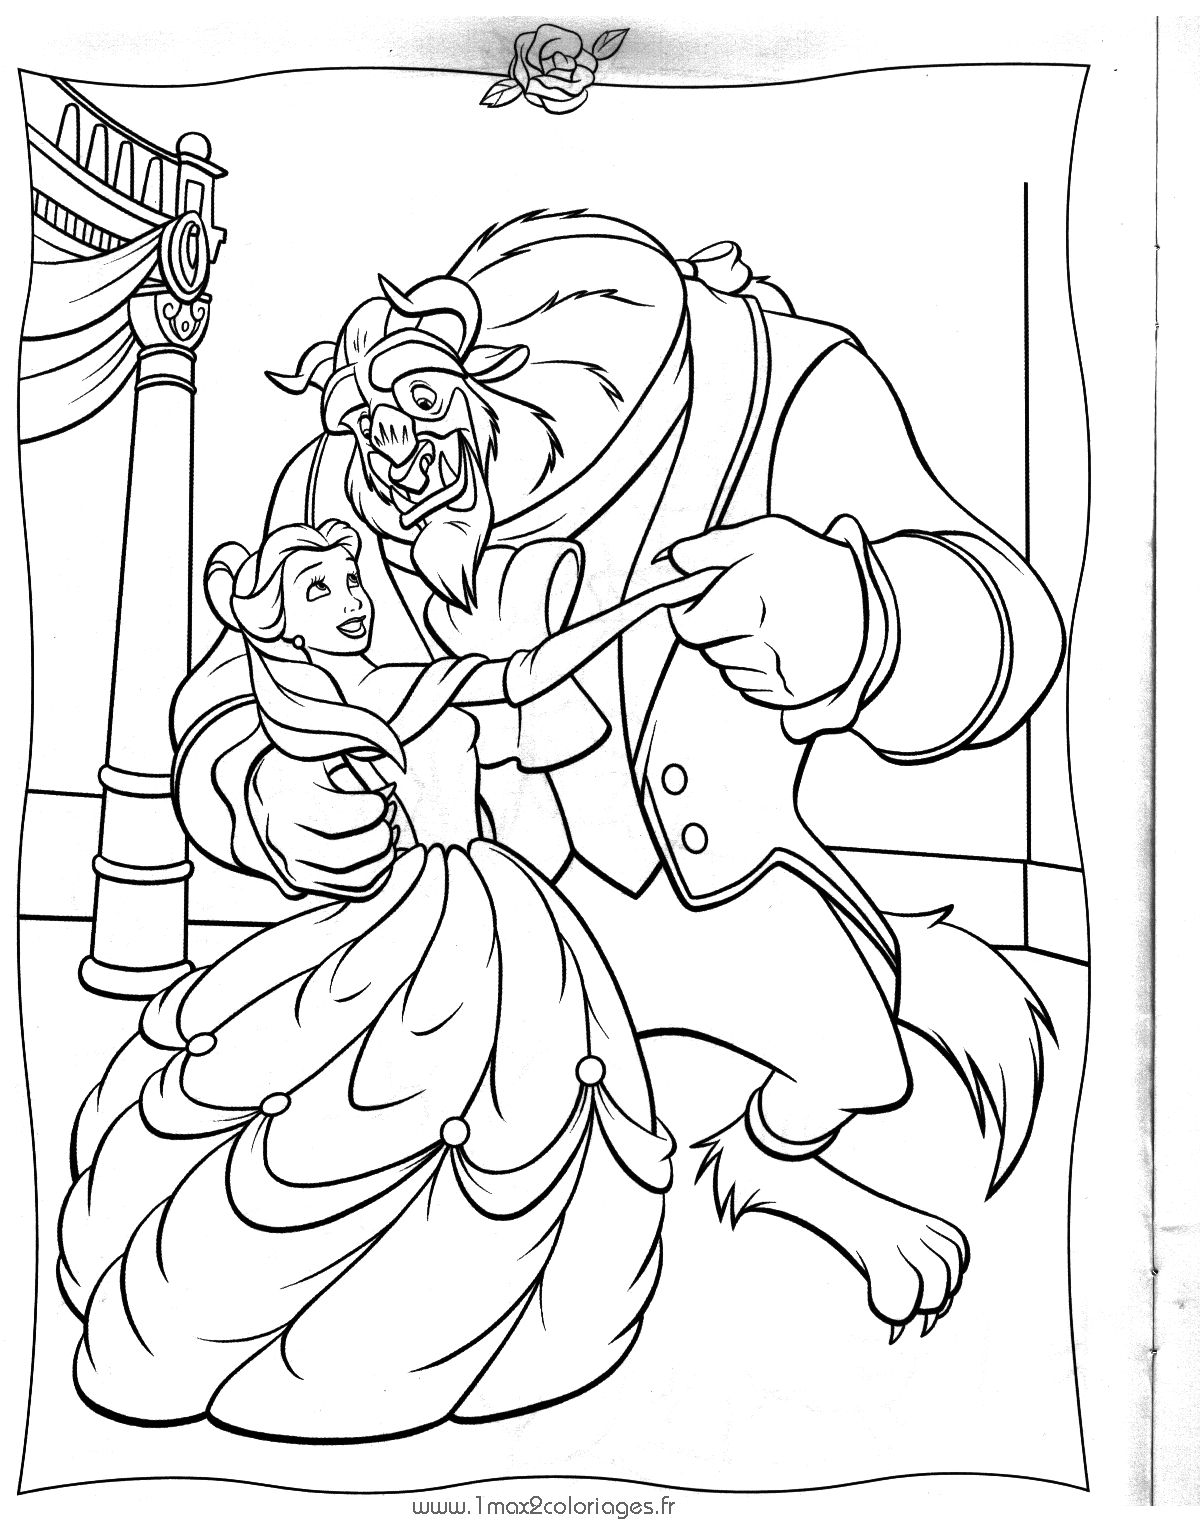 Coloring page: The Beauty and the Beast (Animation Movies) #131041 - Free Printable Coloring Pages